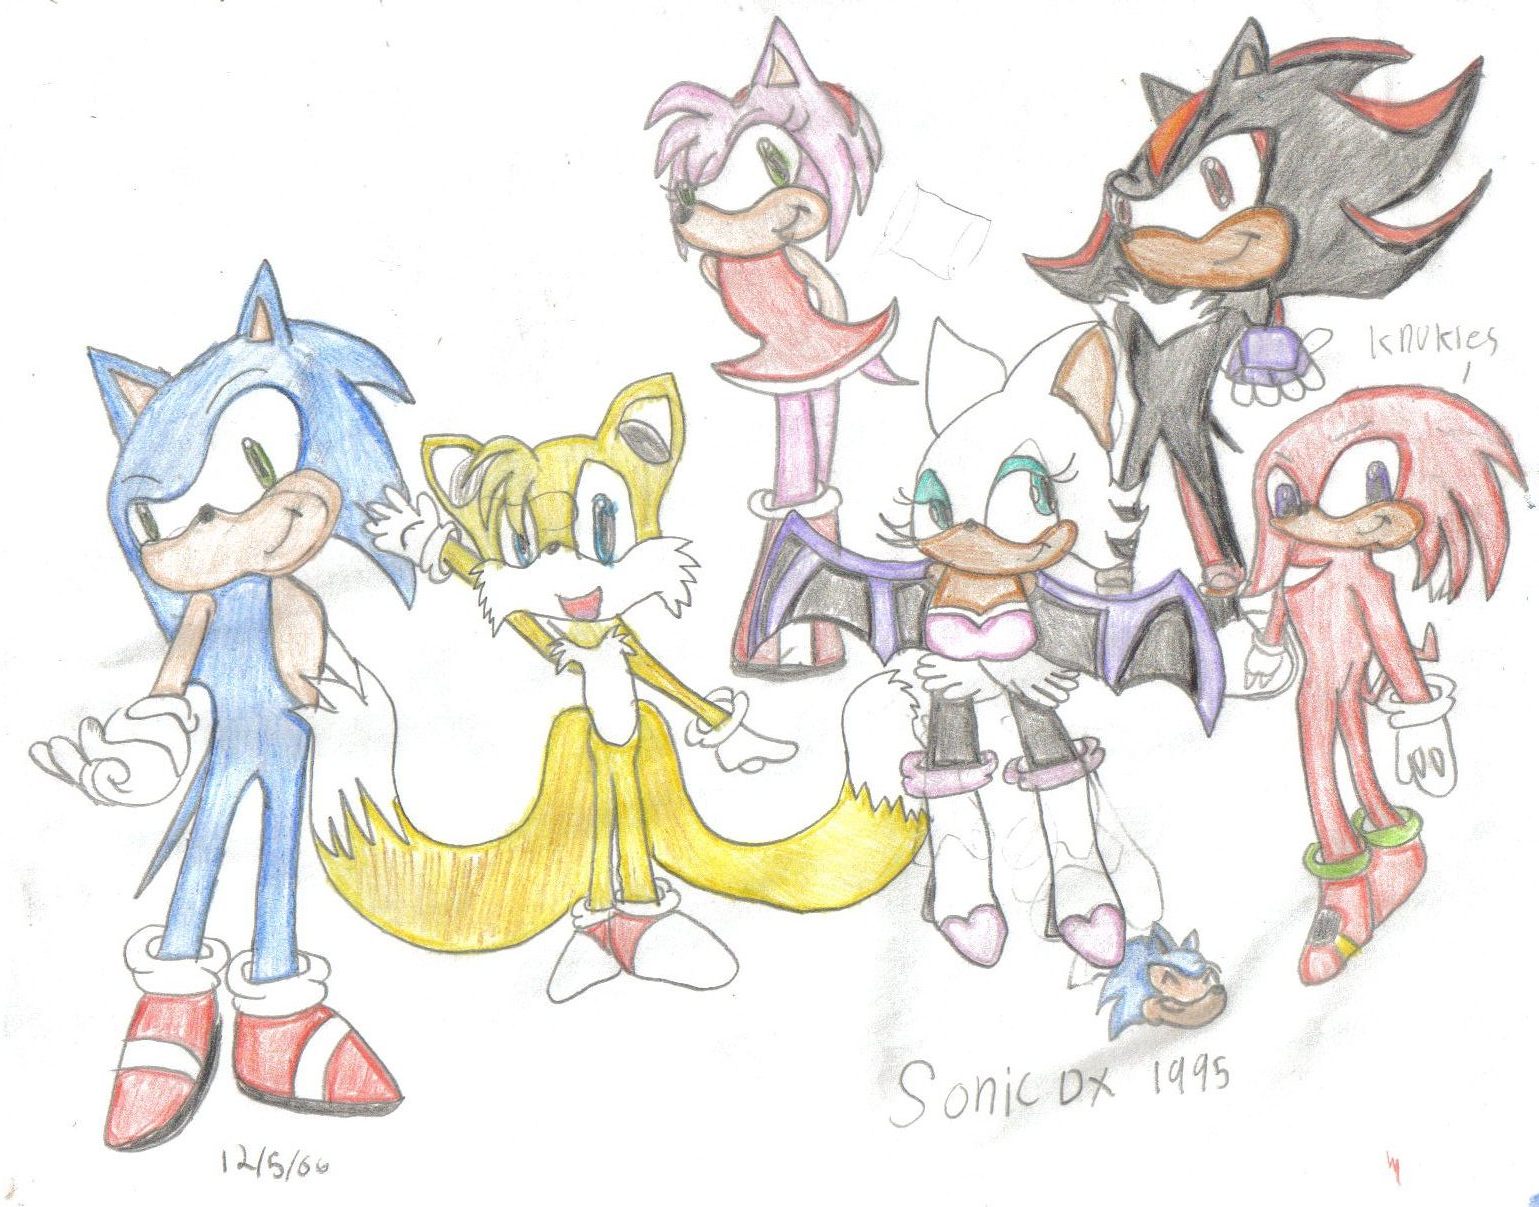 lovetails request by SonicDX1995